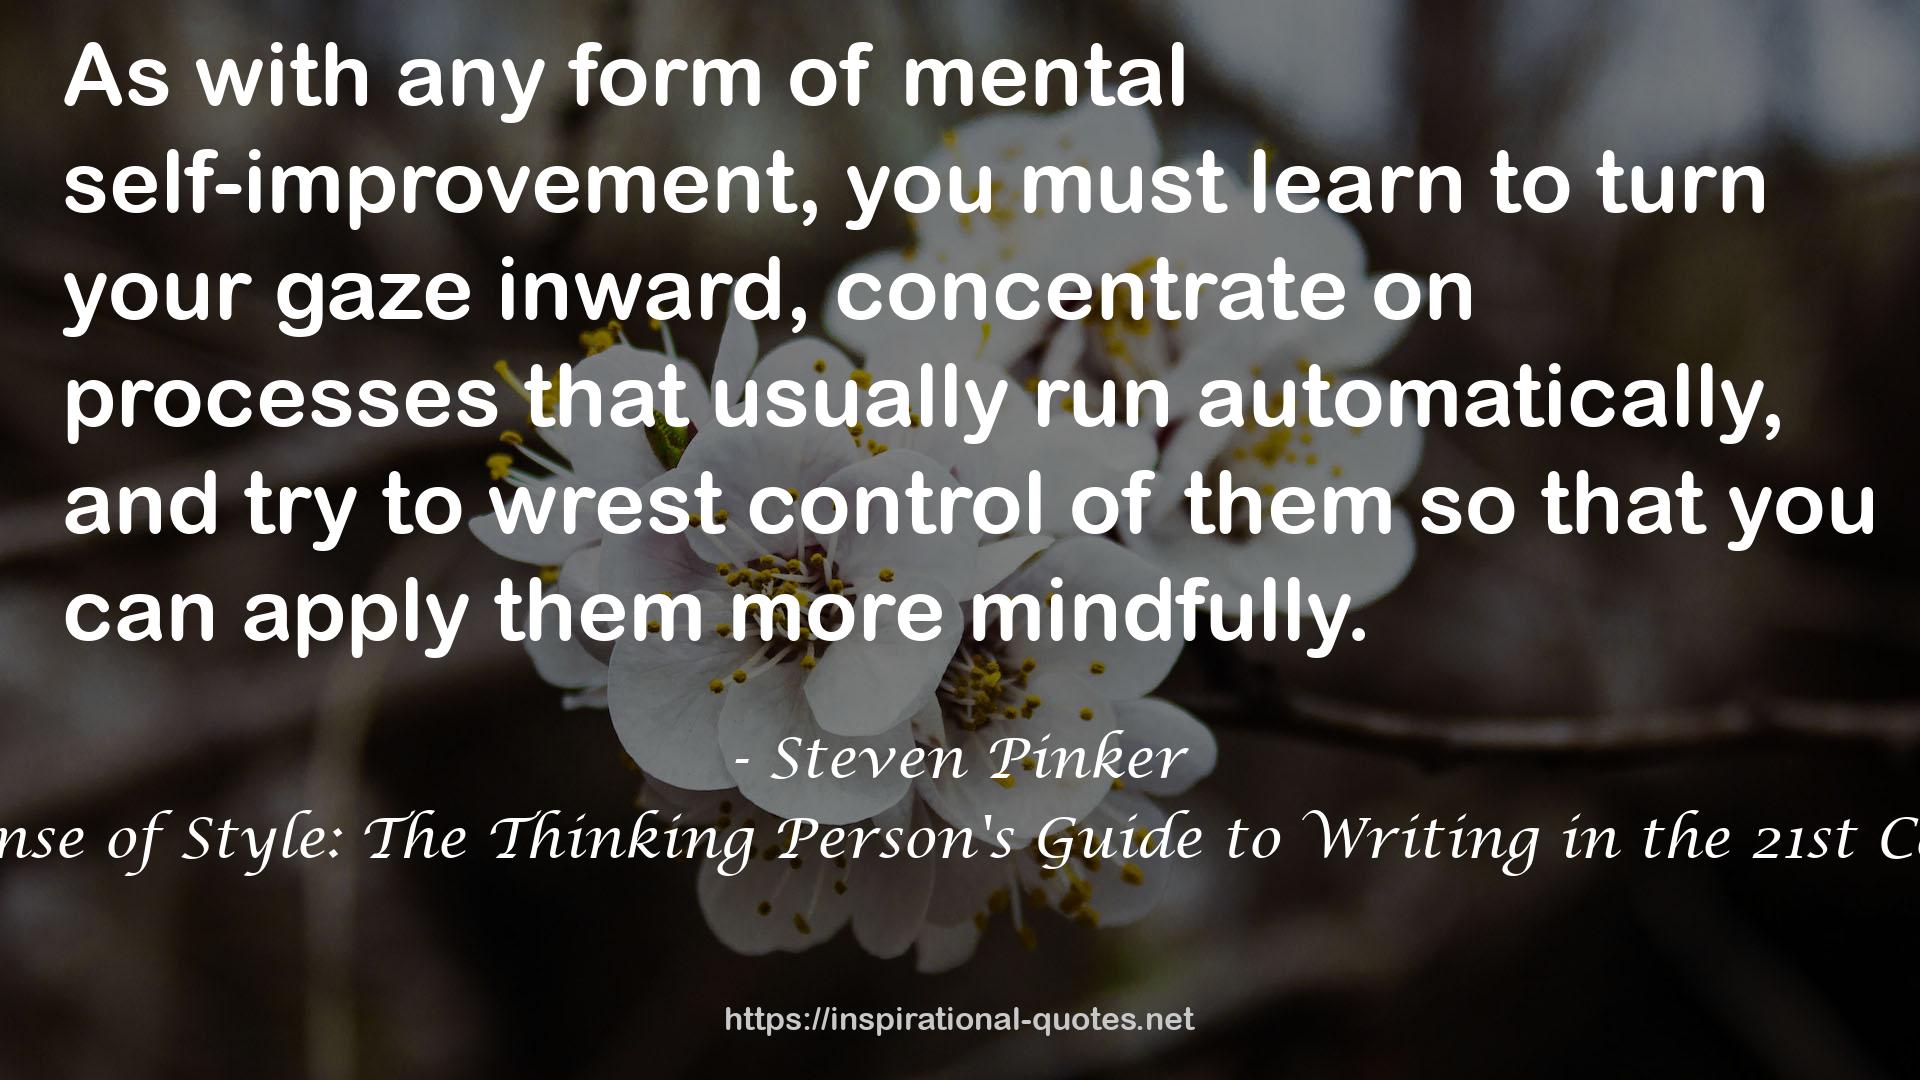 The Sense of Style: The Thinking Person's Guide to Writing in the 21st Century QUOTES